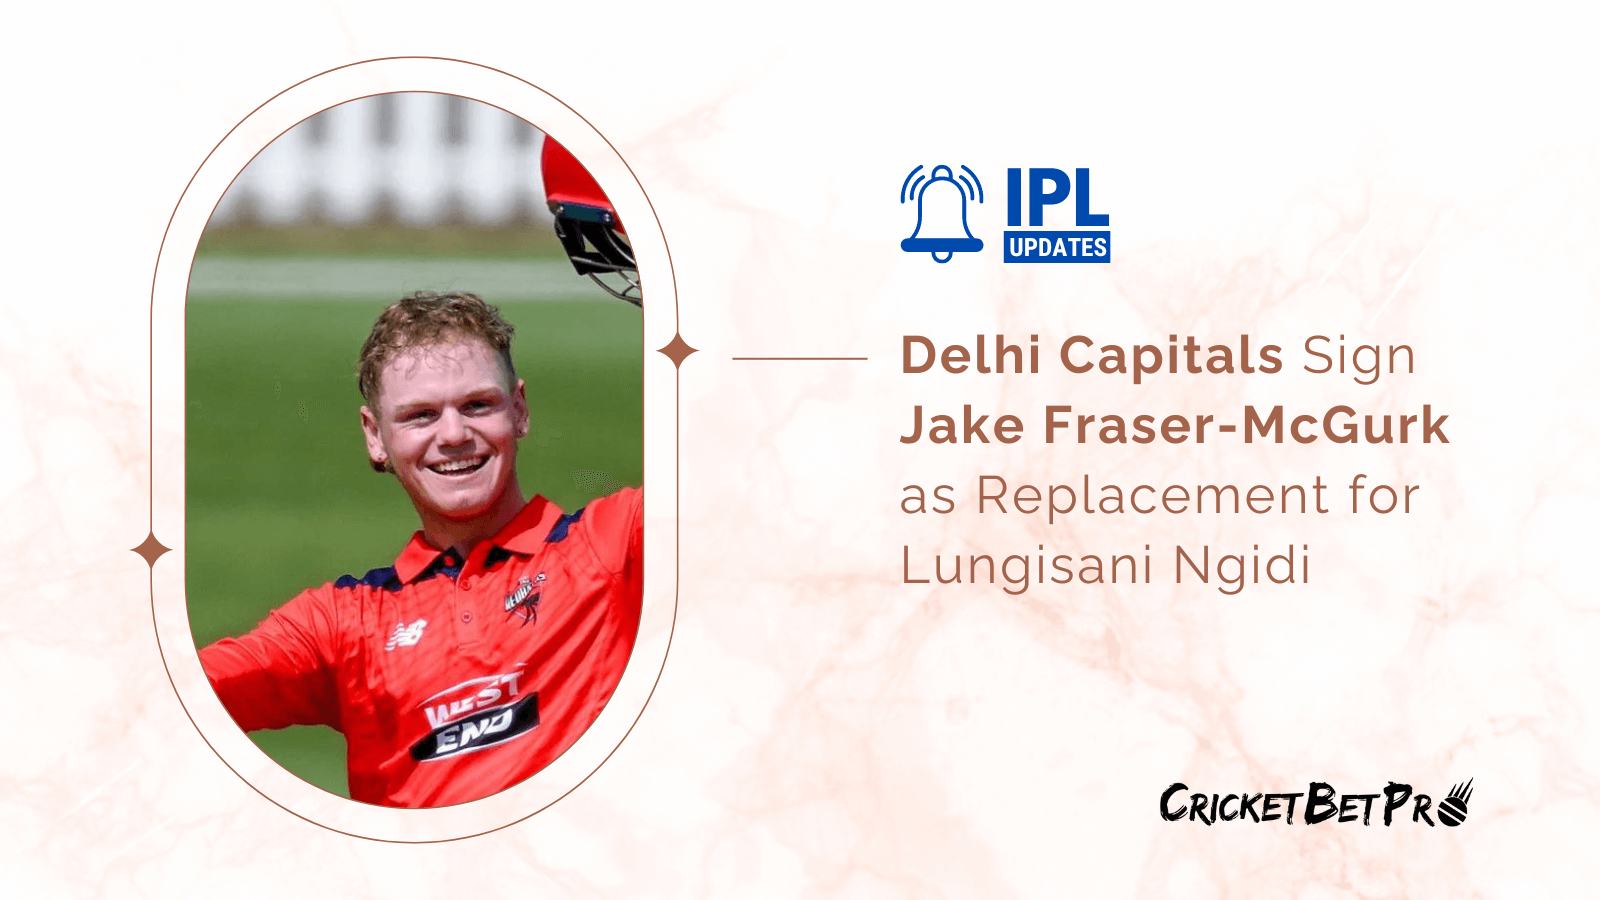 Delhi Capitals Sign Jake Fraser-McGurk as Replacement for Lungisani Ngidi